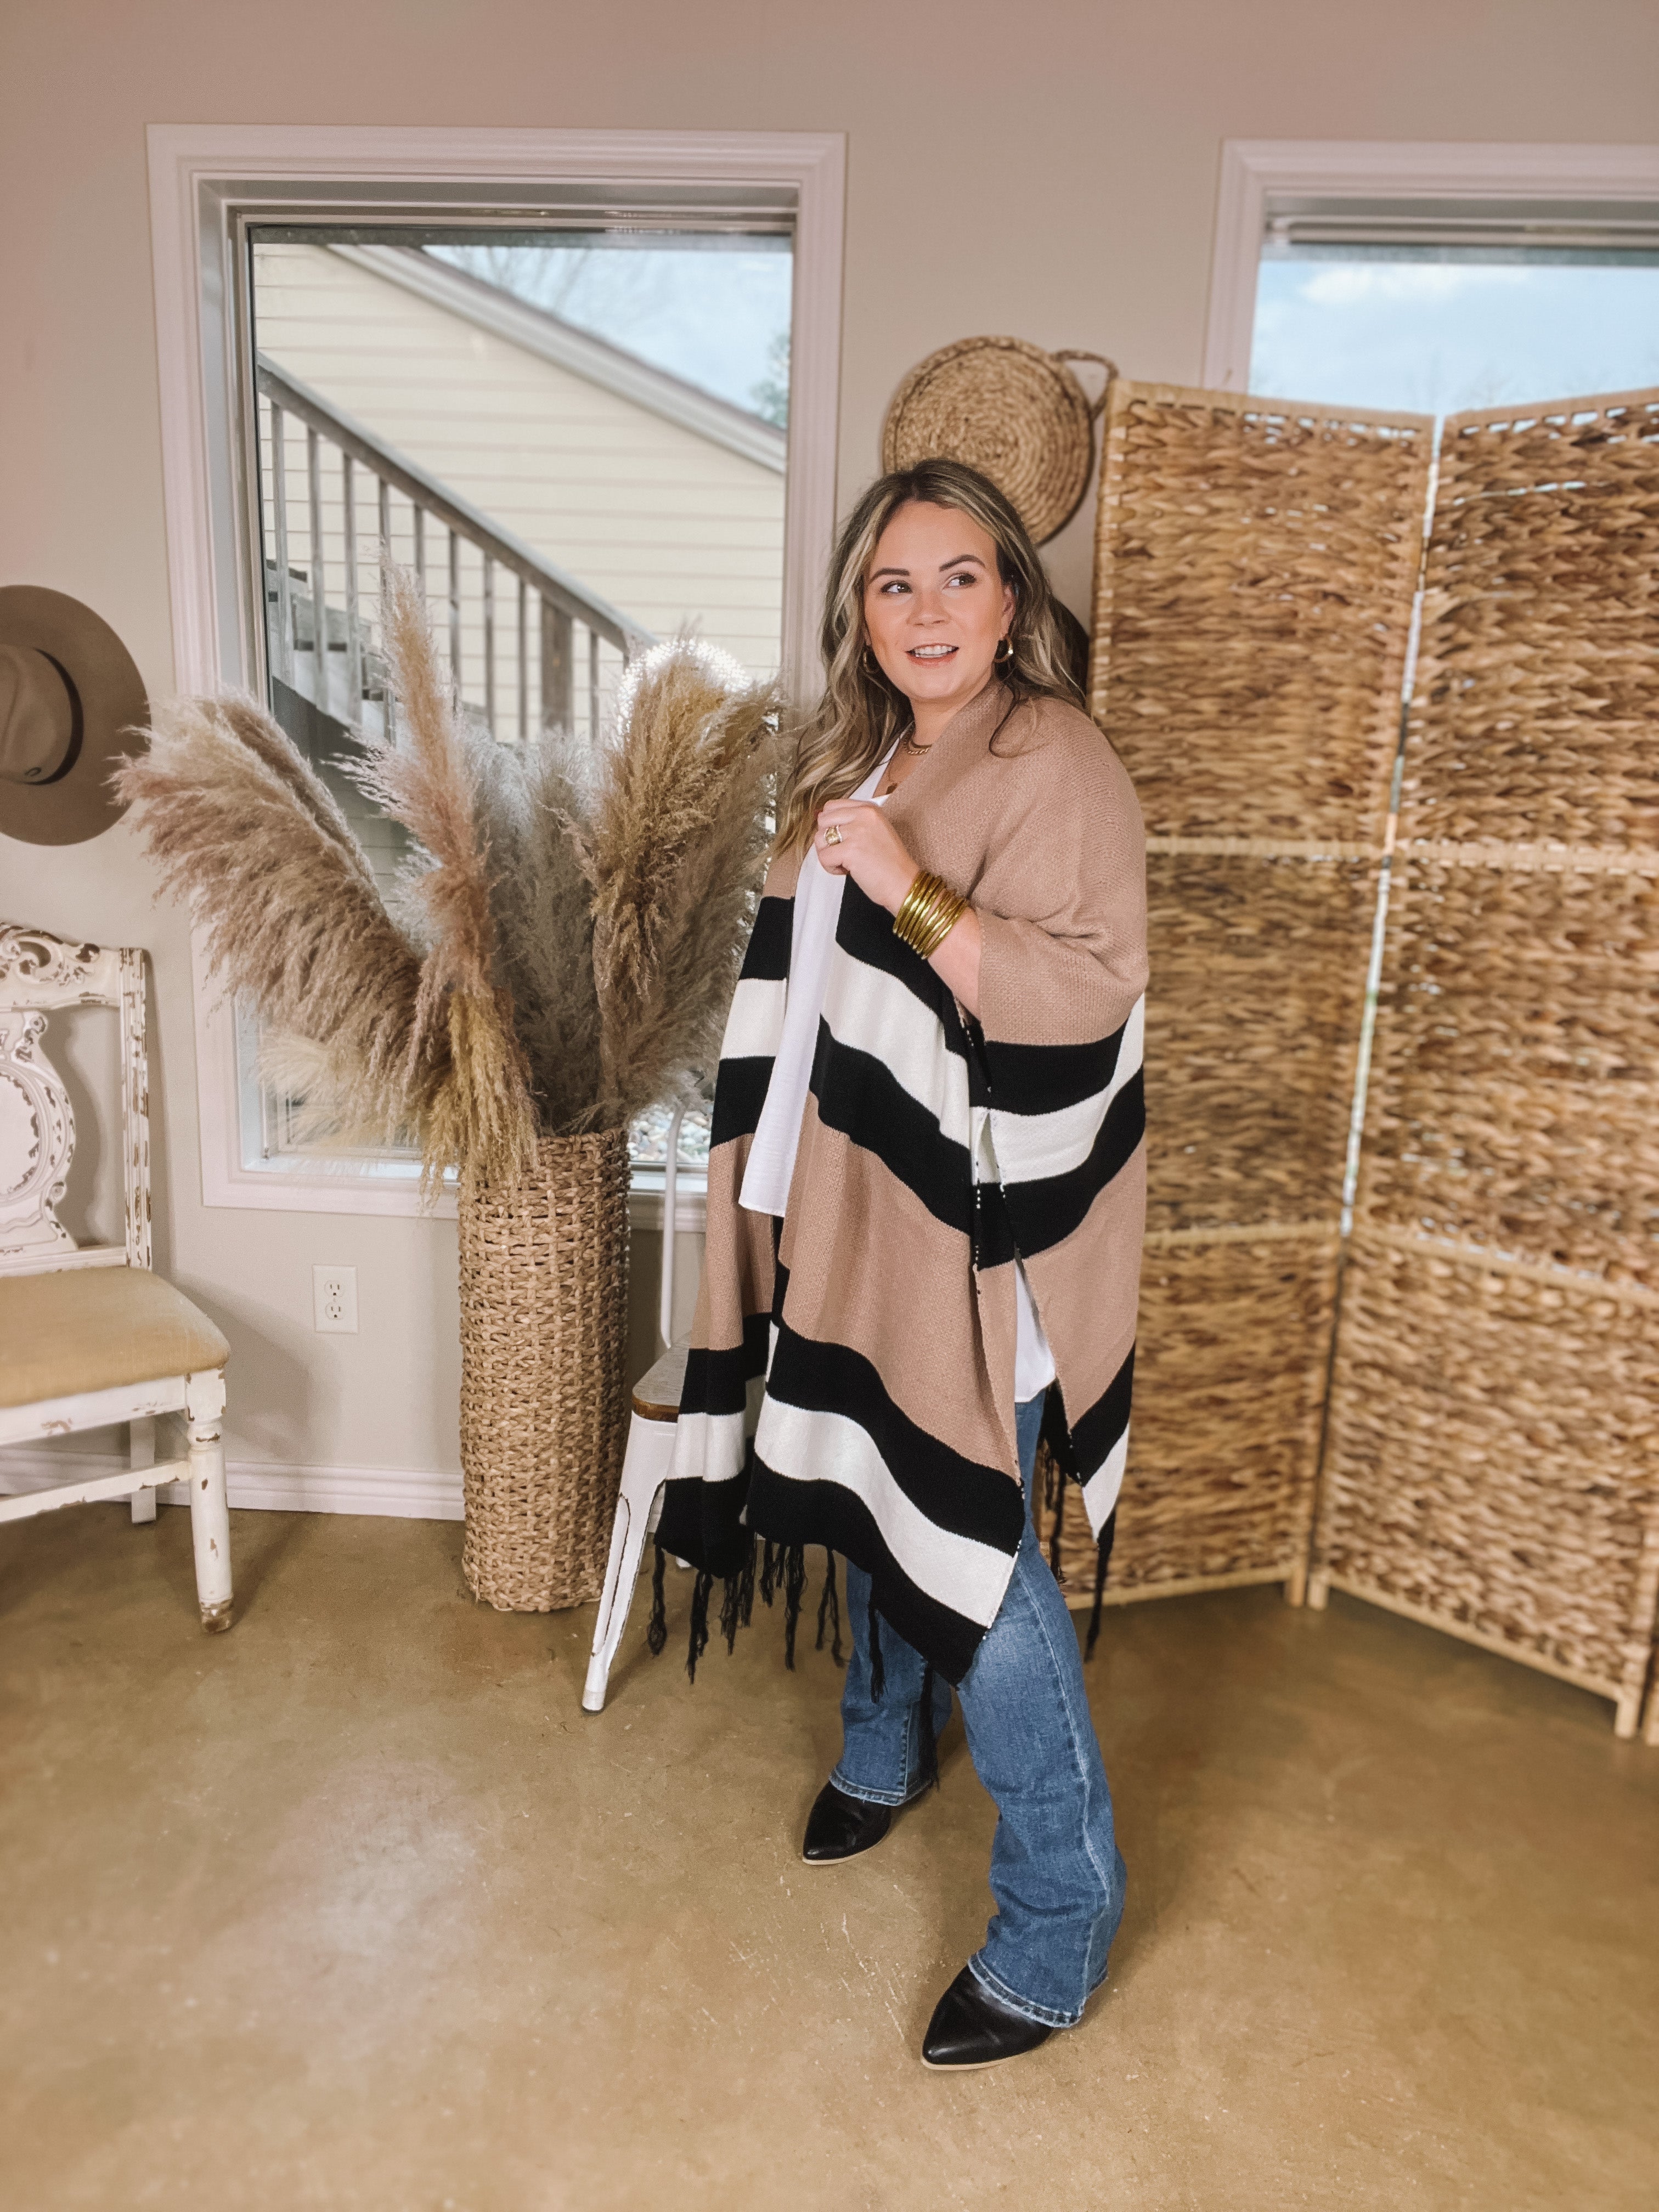 Warmest Wishes Striped Poncho Cardigan with Tassel Fringe in Mocha, Ivory, and Black - Giddy Up Glamour Boutique